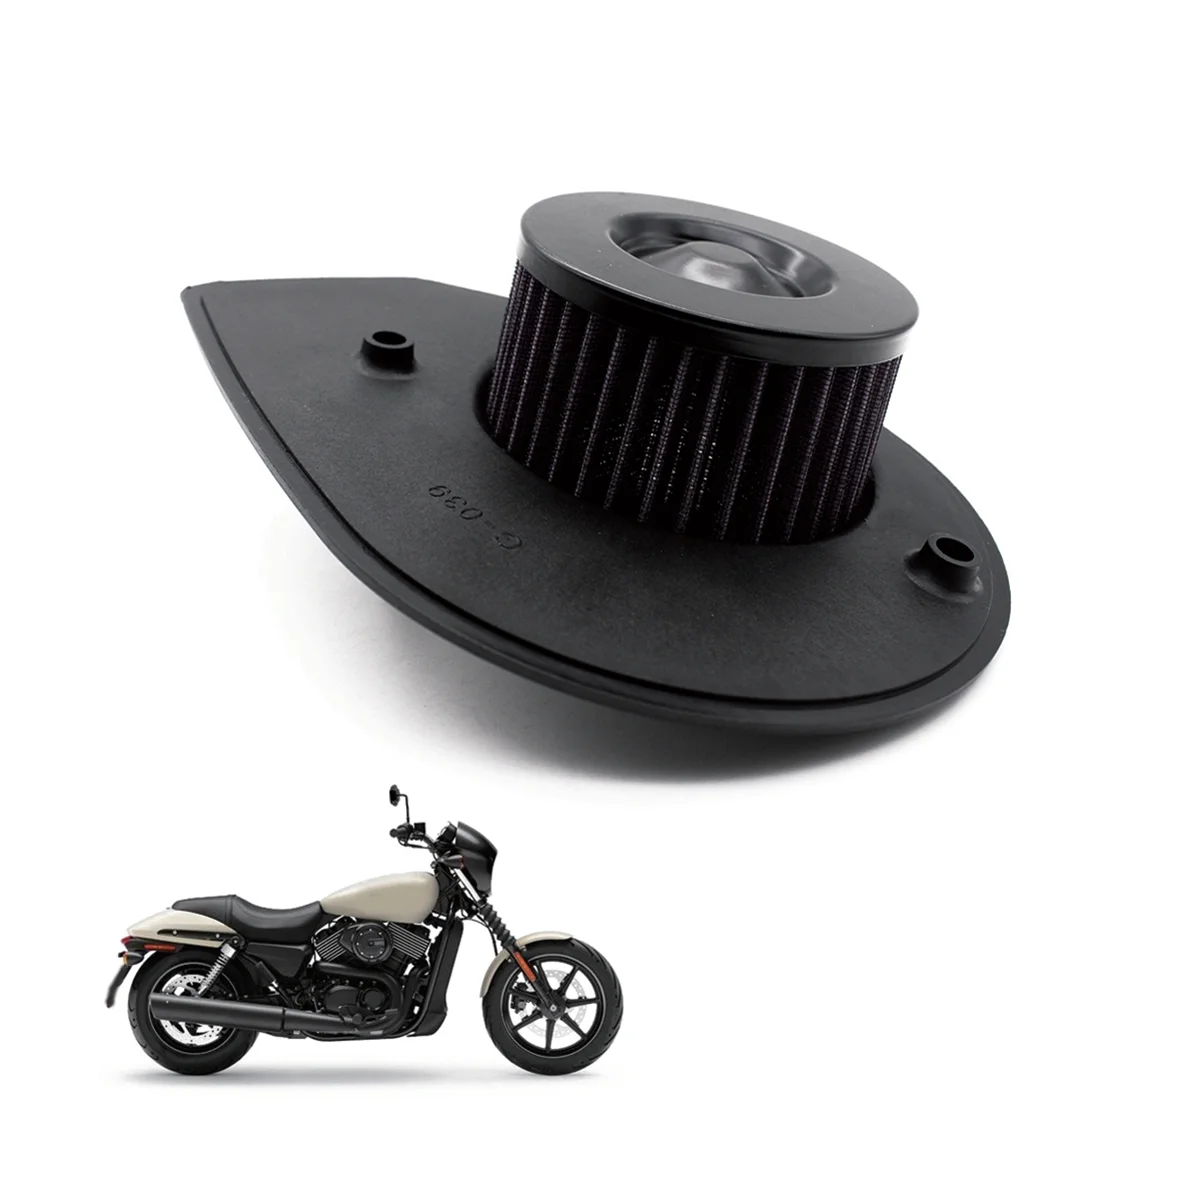 

Motorcycle High Flow Air Filter Elements Style Filter for XG750 Street750 XG500